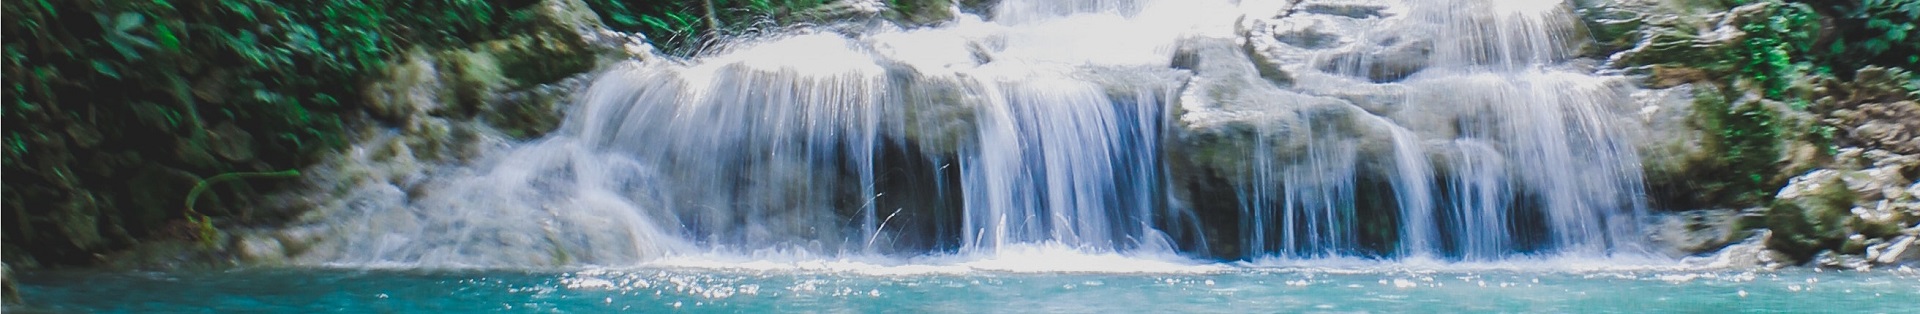 A representation of the Waters of Mormon which is the basis for the name of the Book of Mormon